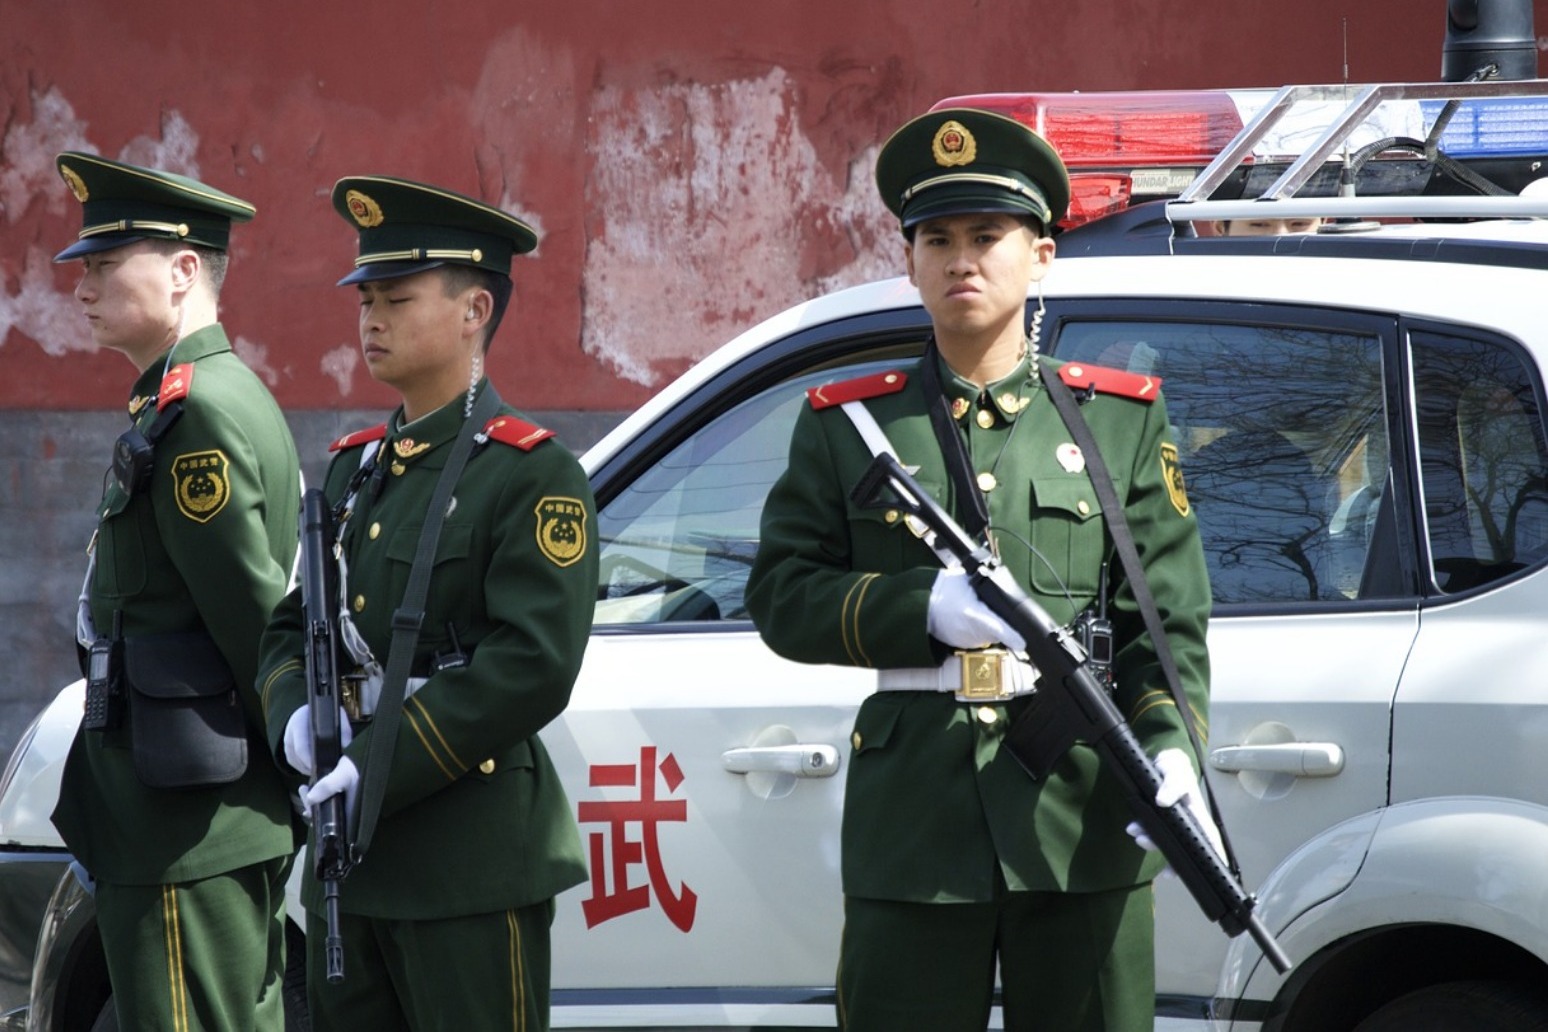 14 children injured after a knife attack in China - one arrested. 